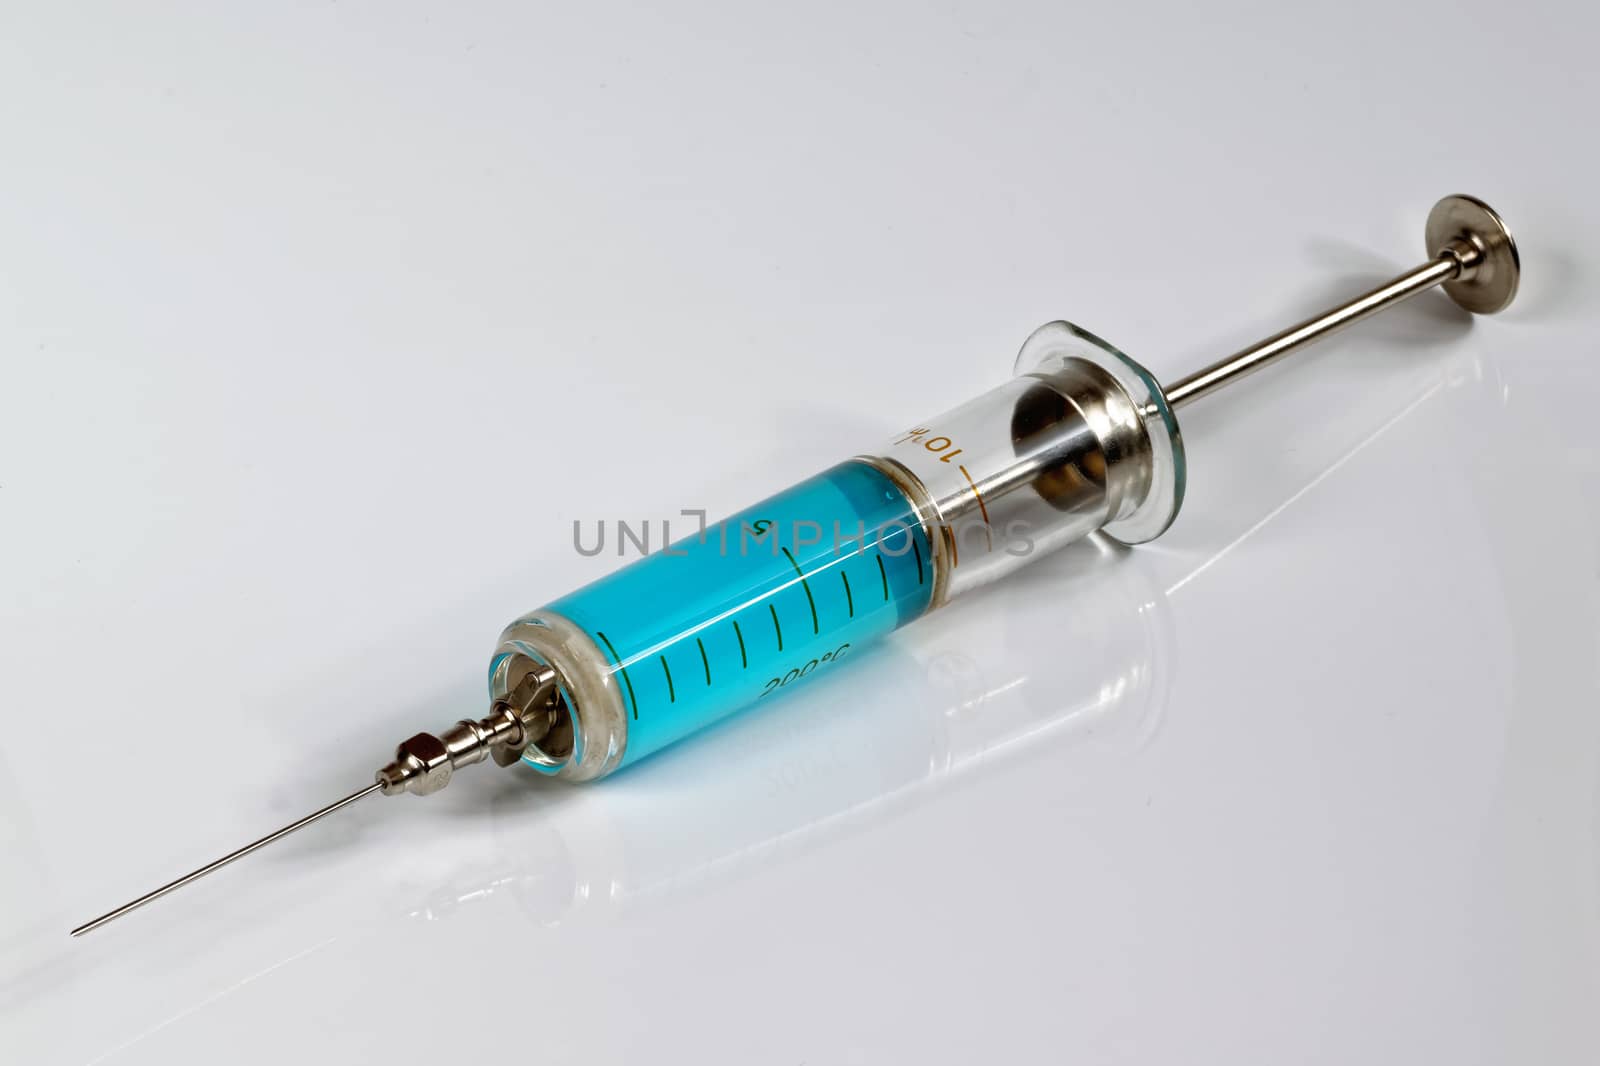 injection needle with medicine by Bleshka